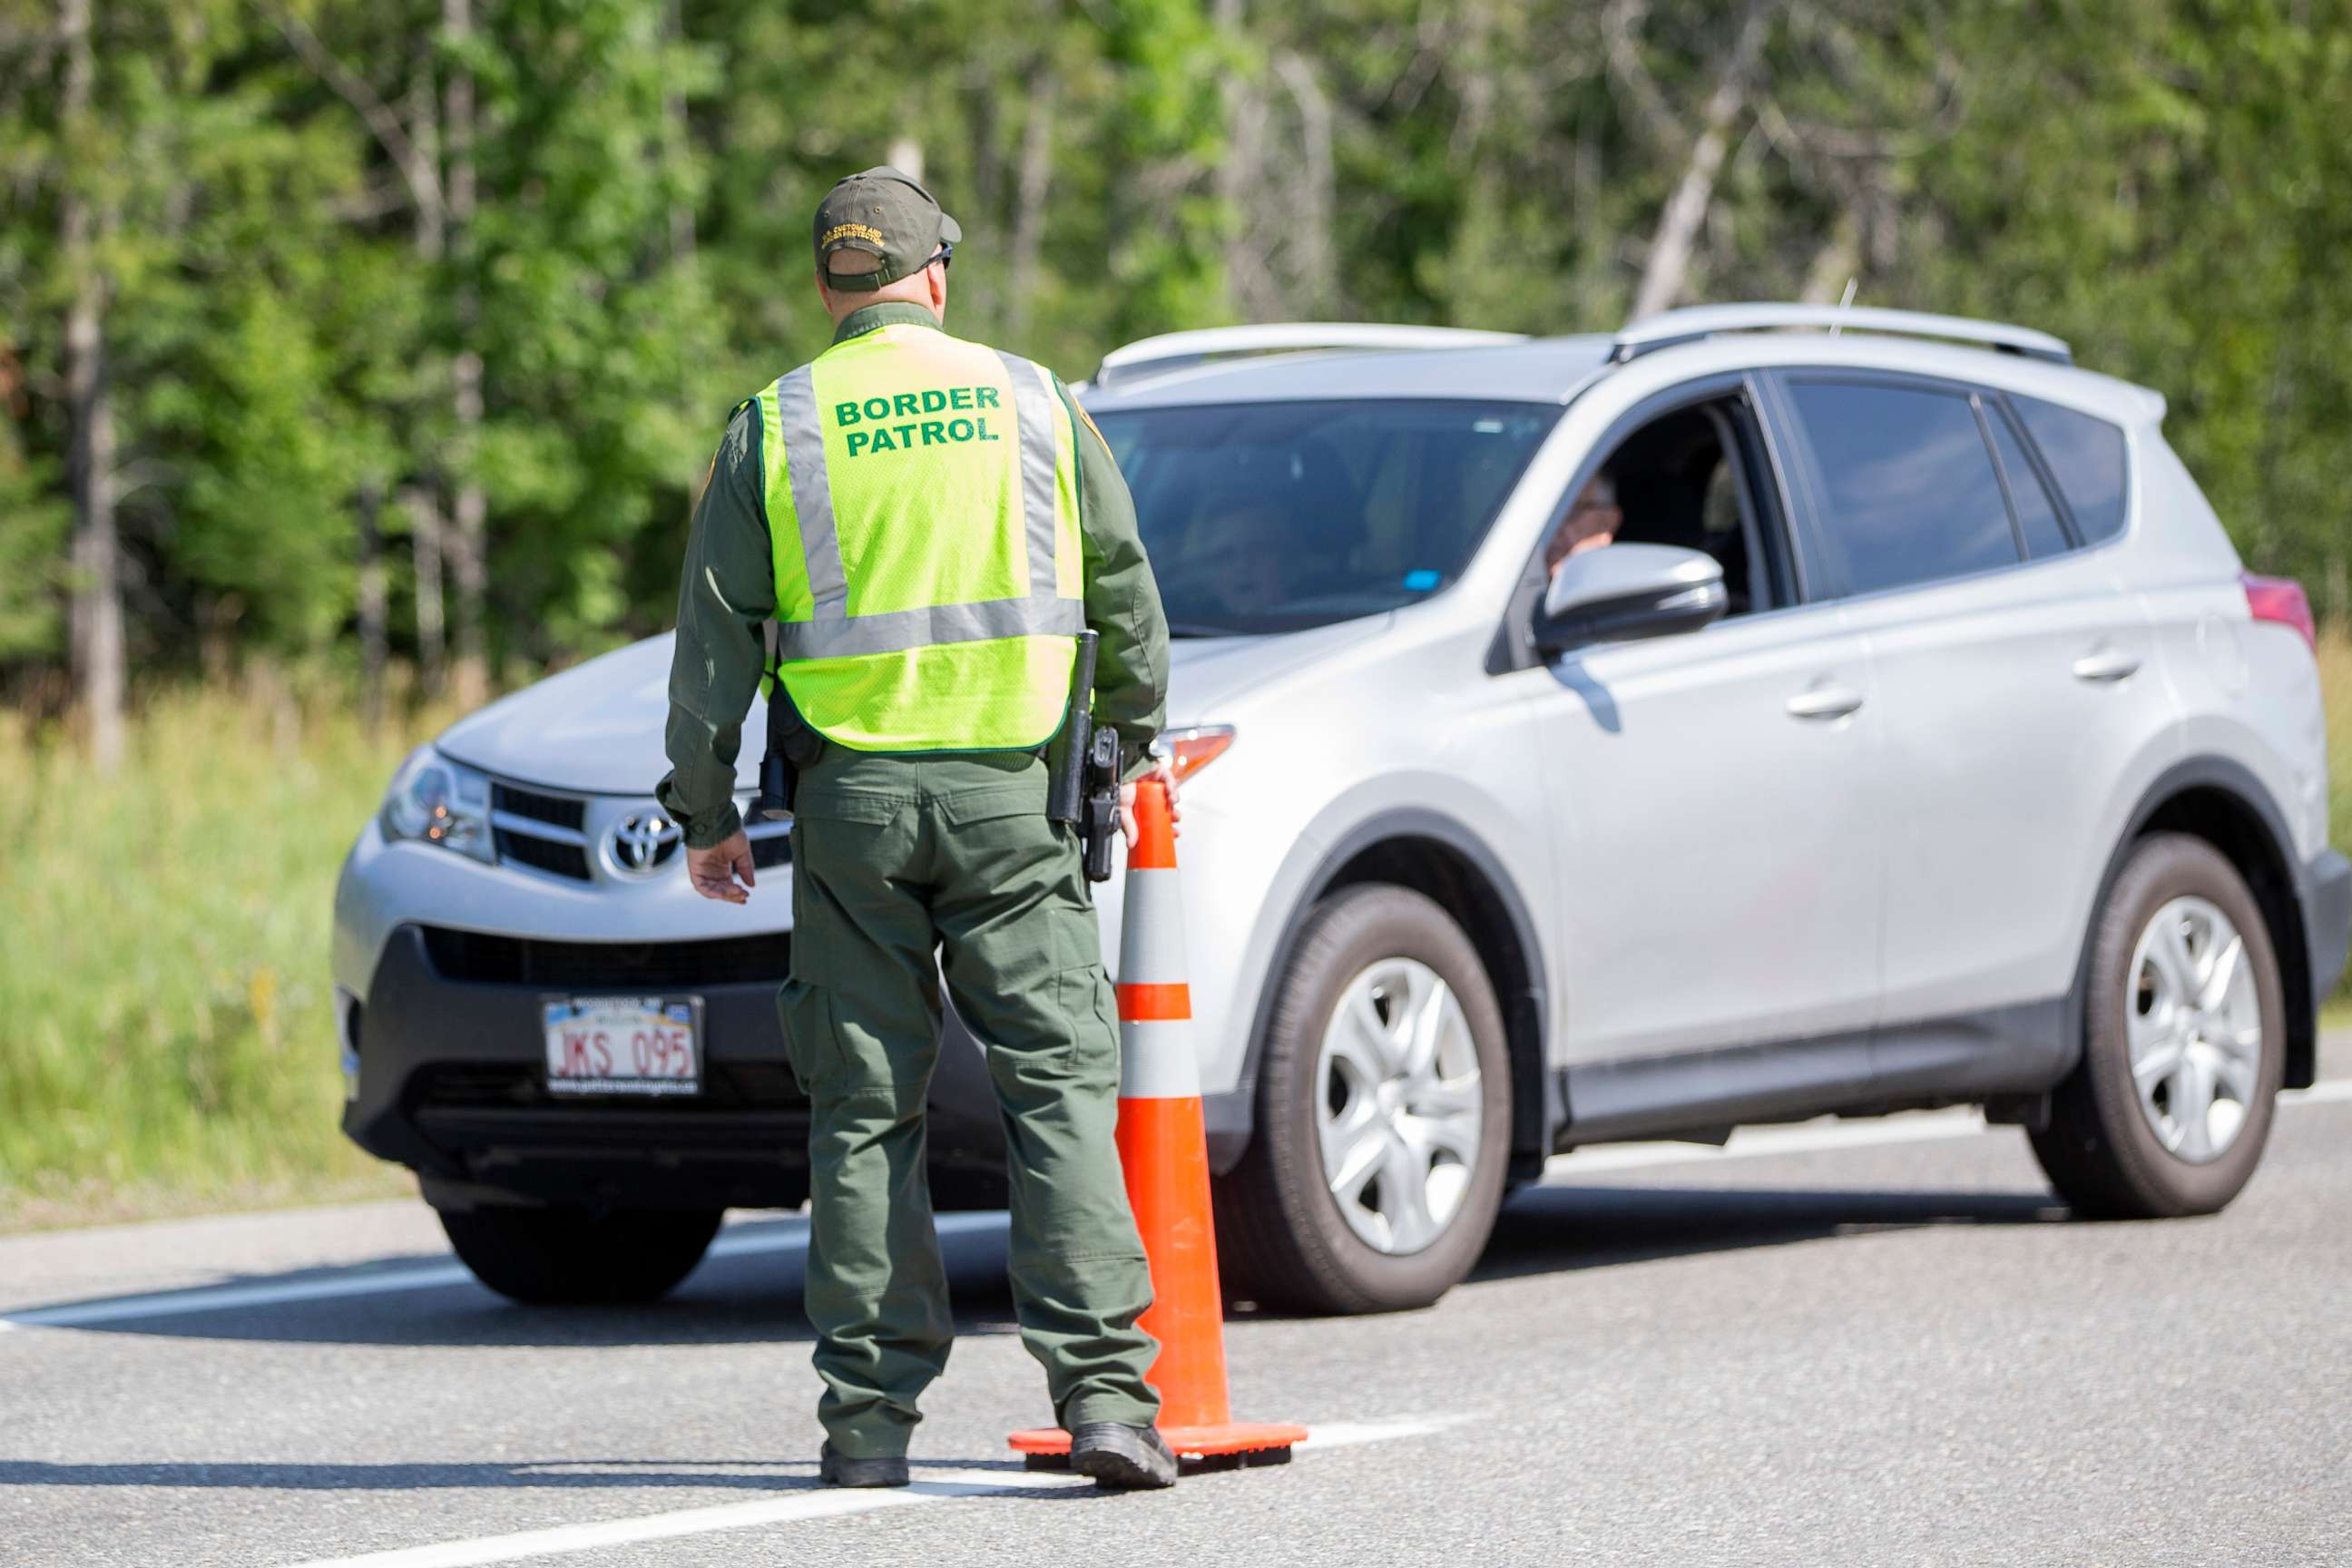 PHOTO: A U.S. Border Patrol agent watches as vehicles enter a highway checkpoint on Aug. 1, 2018 in West Enfield, Maine. oto by Scott Eisen/Getty Images)